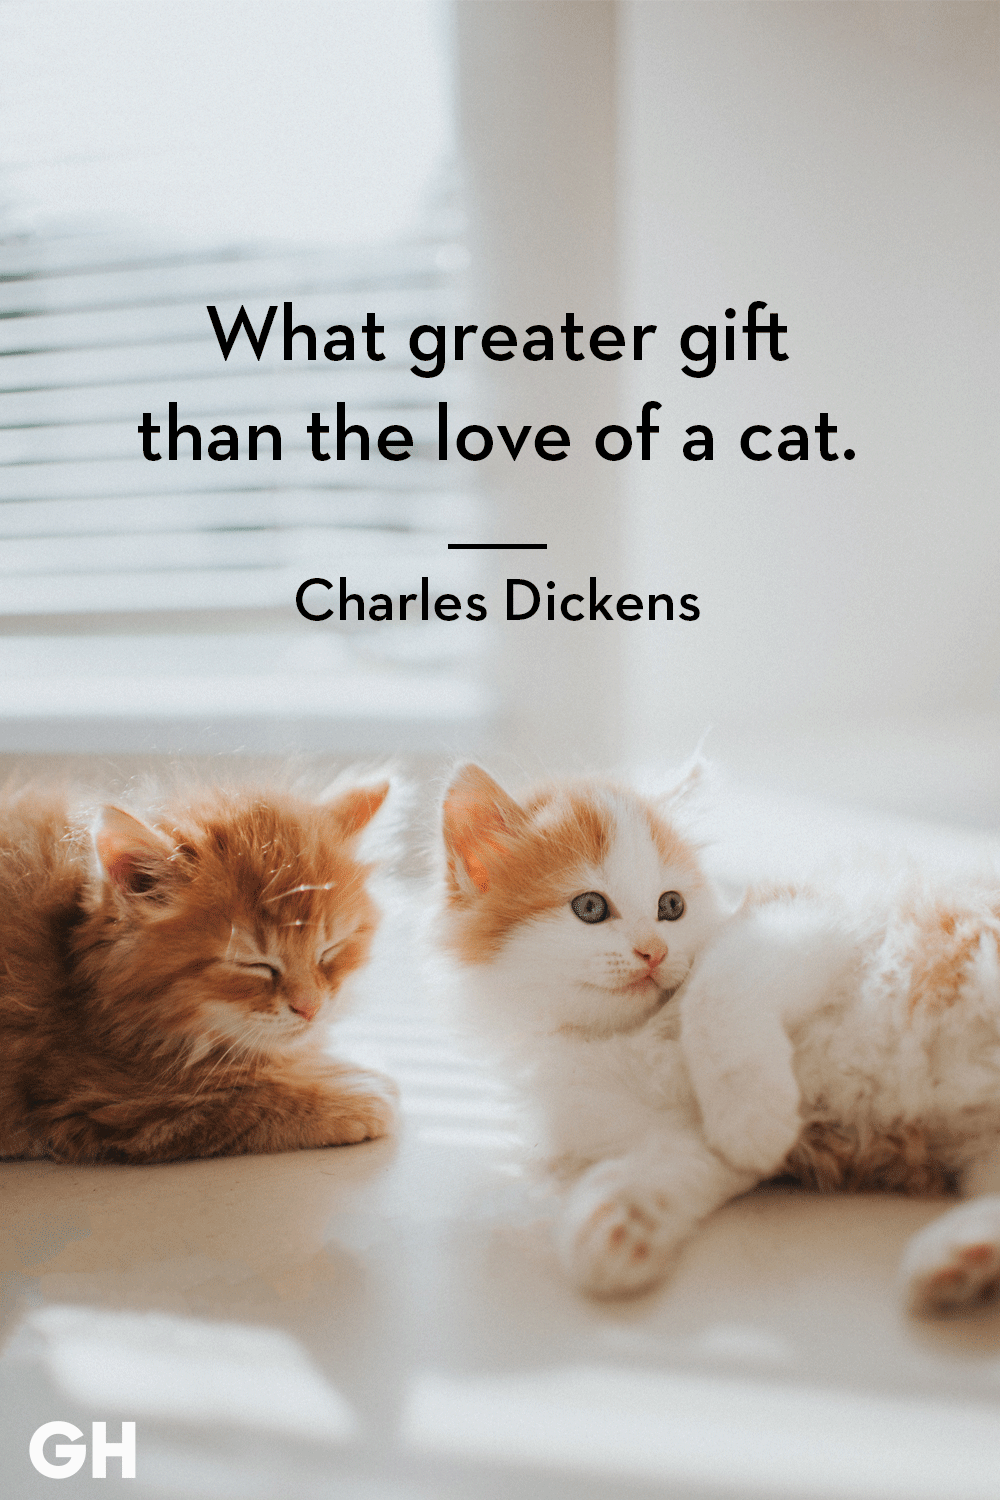 ghk-cat-quotes-charles-dickens-1543597192.png